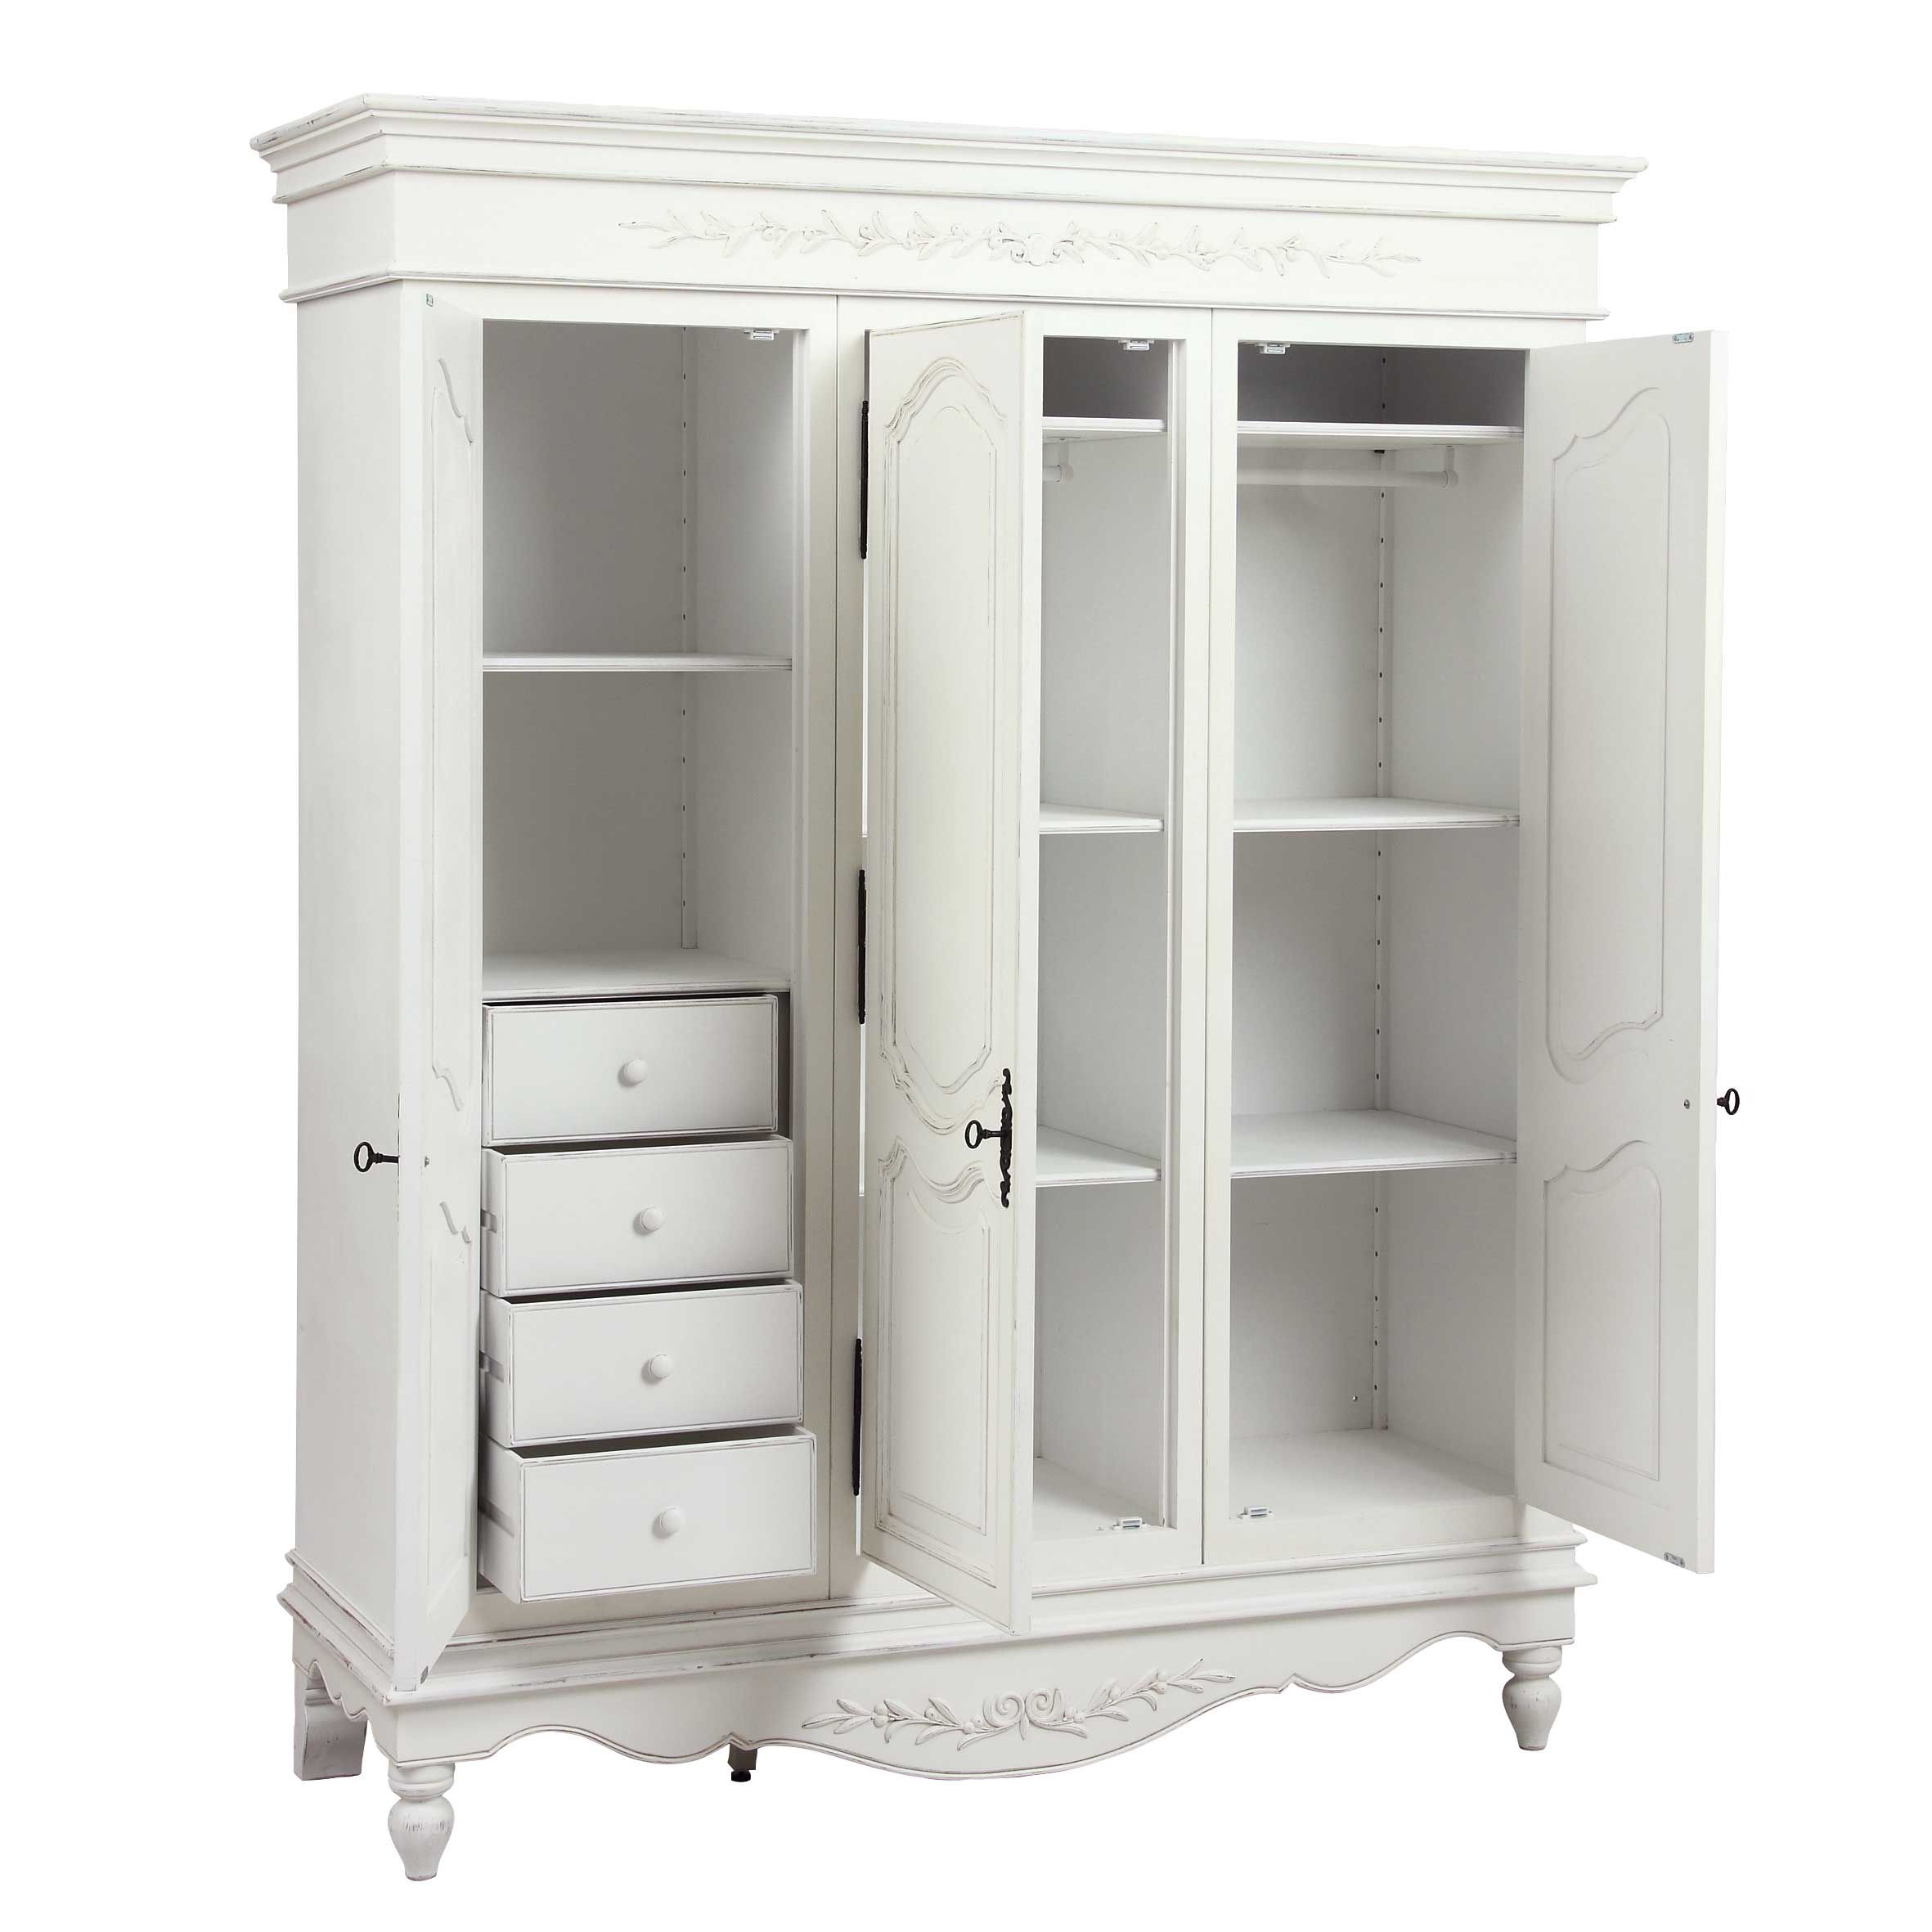 French 3 Door Wardrobe – Romance – Low Cost Delivery, Nationwide With 3 Door French Wardrobes (View 5 of 15)